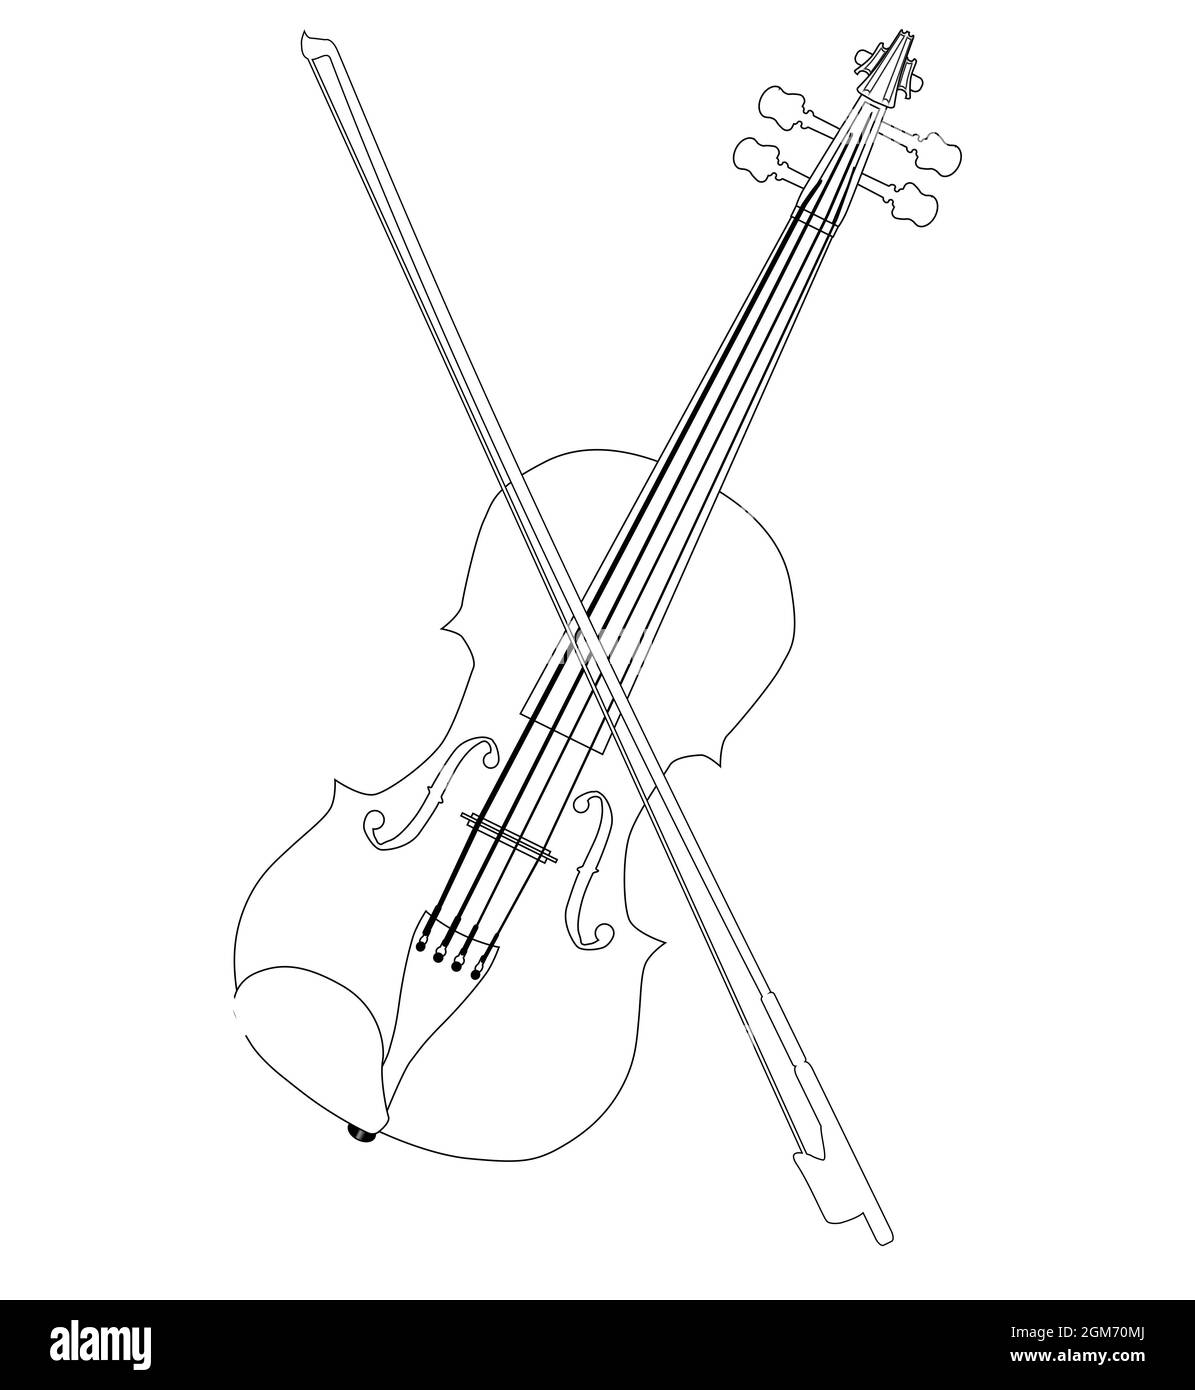 A typical violin and bow in black line drawing isolated over a white background Stock Photo